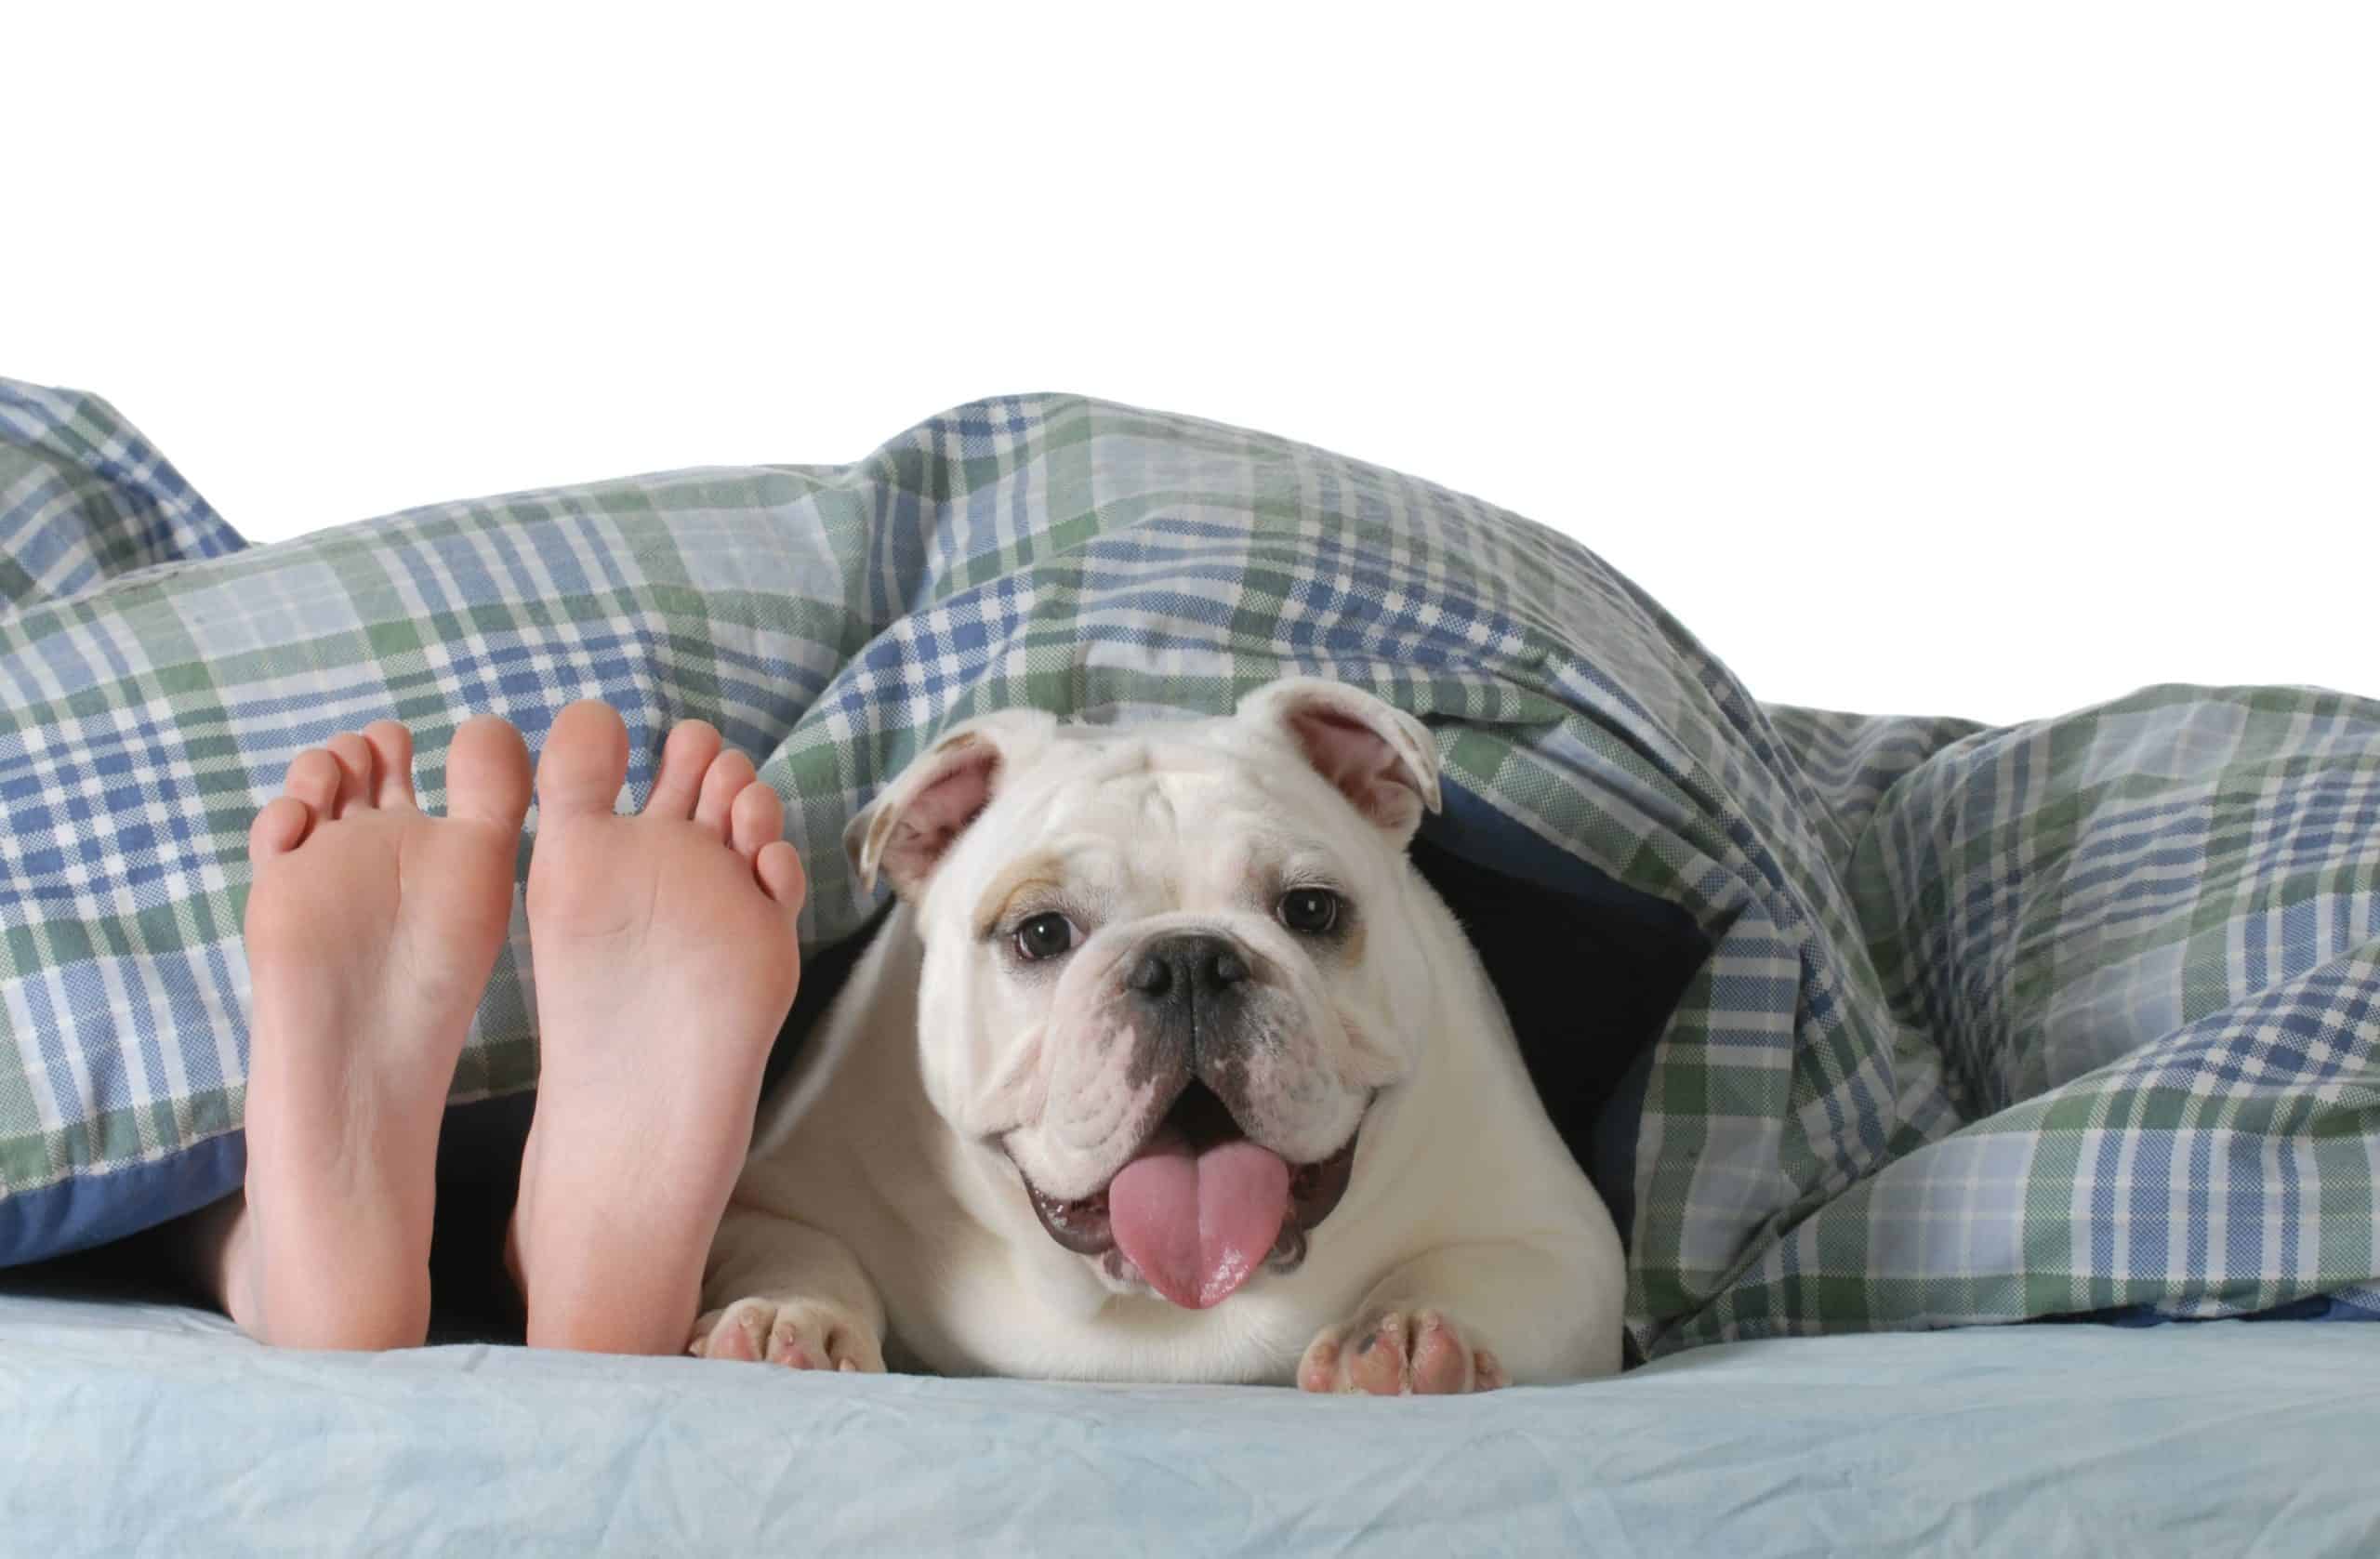 Pug pants at night while sleeping with owner. Panting at night has many causes, and it's up to you to determine why your dog pants excessively and then take action.